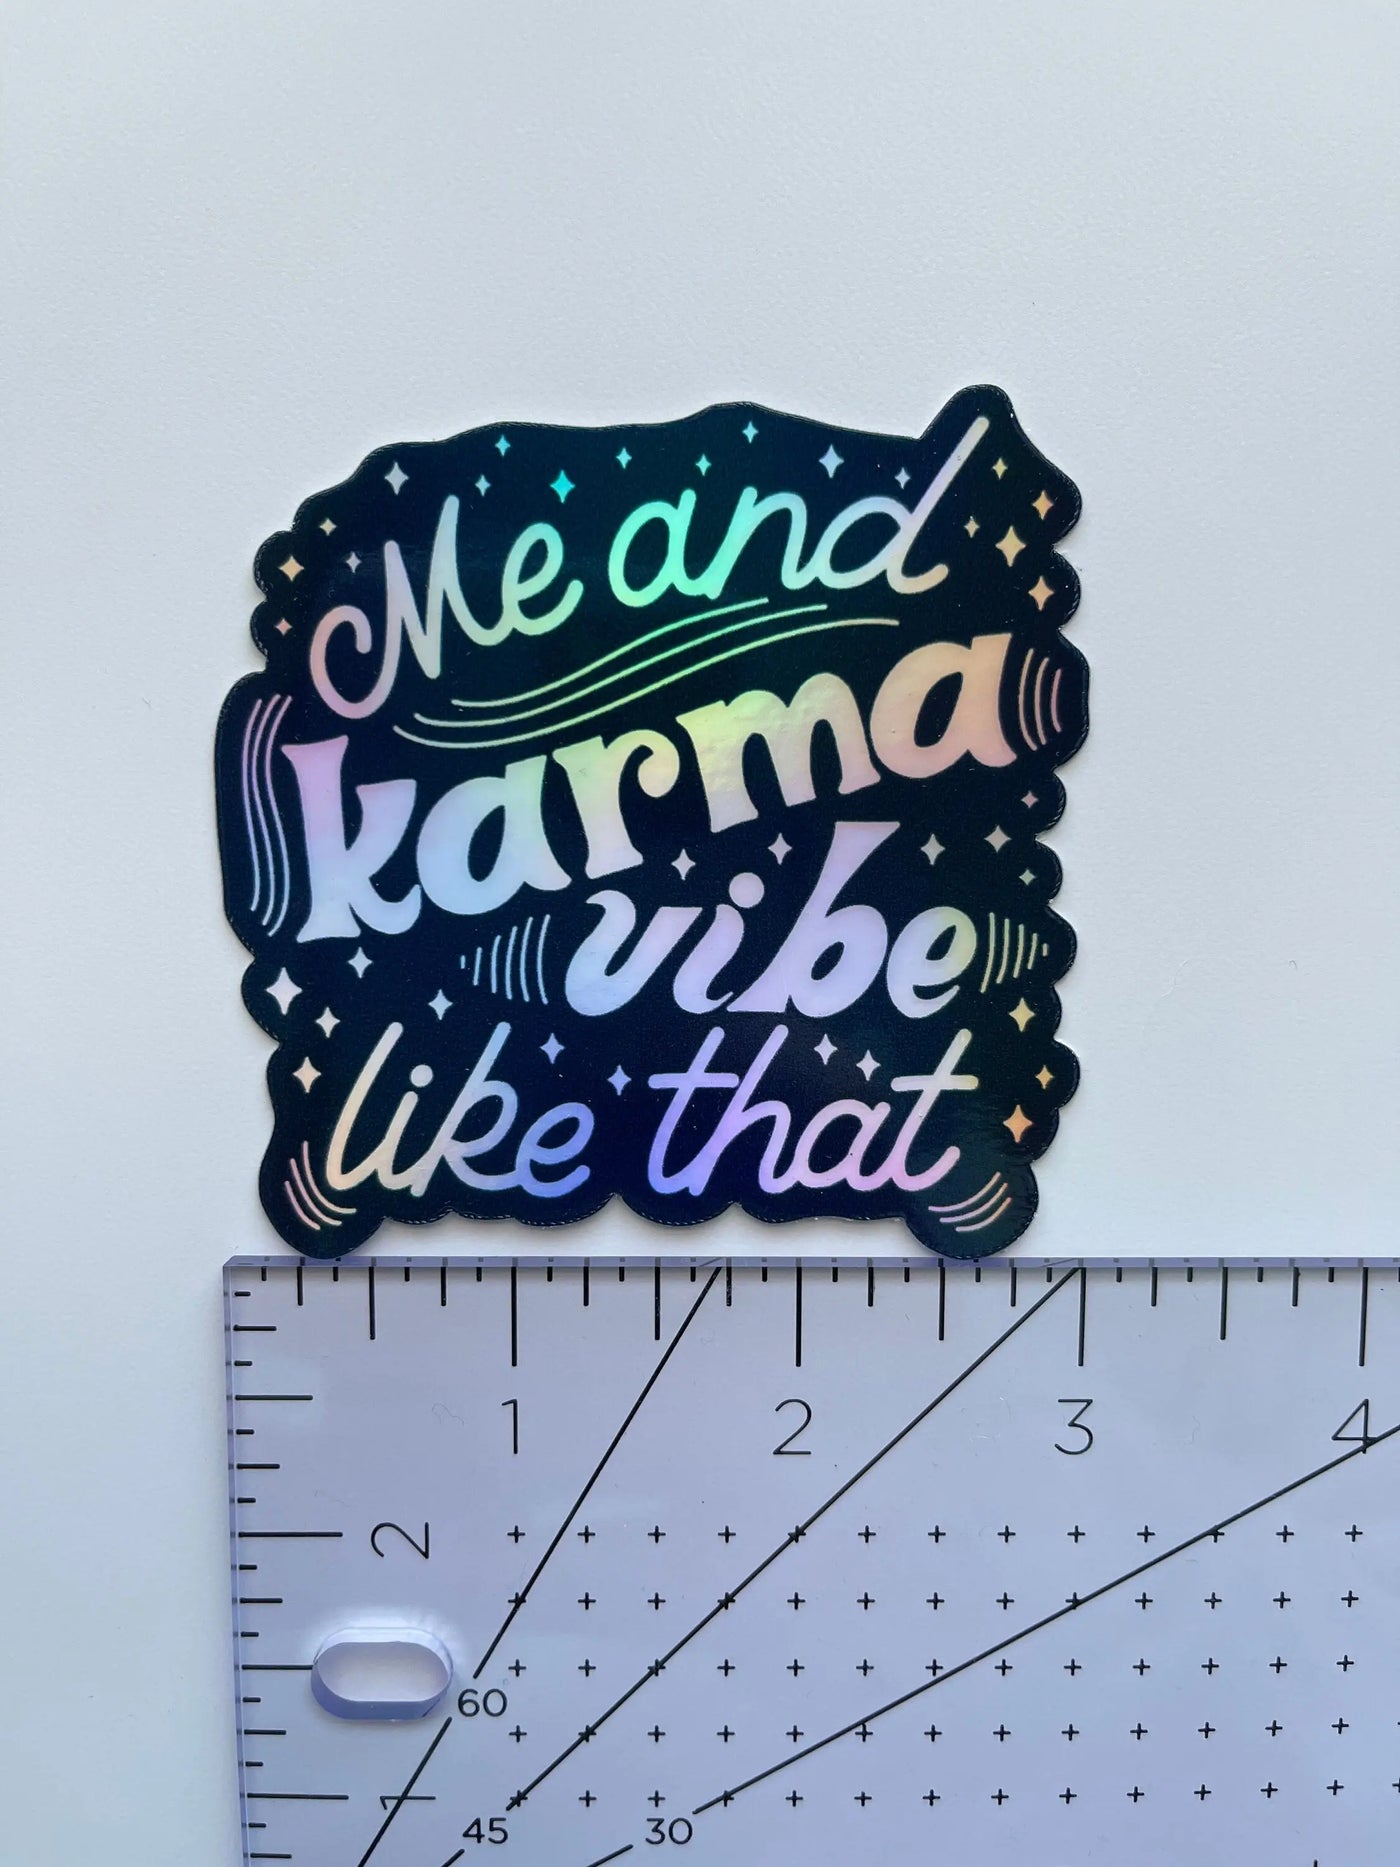 Me and Karma Vibe Like That holographic sticker MangoIllustrated